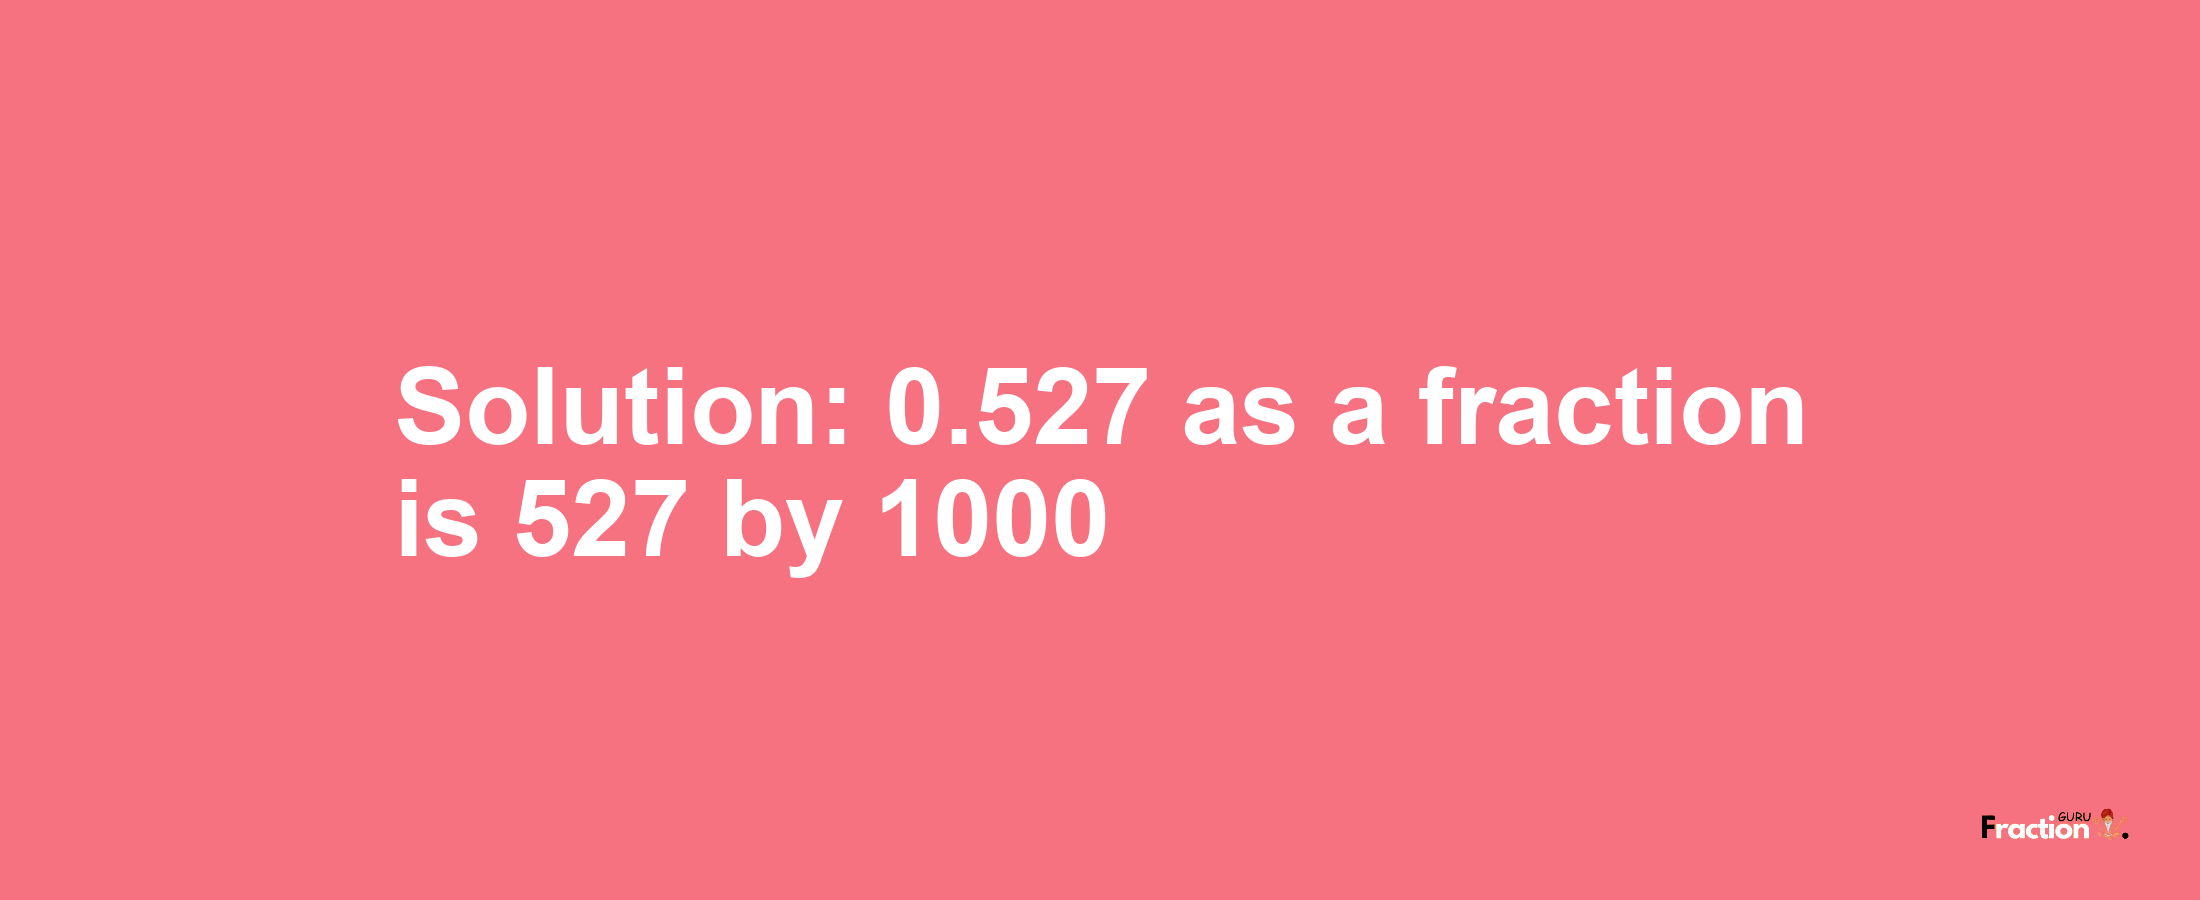 Solution:0.527 as a fraction is 527/1000